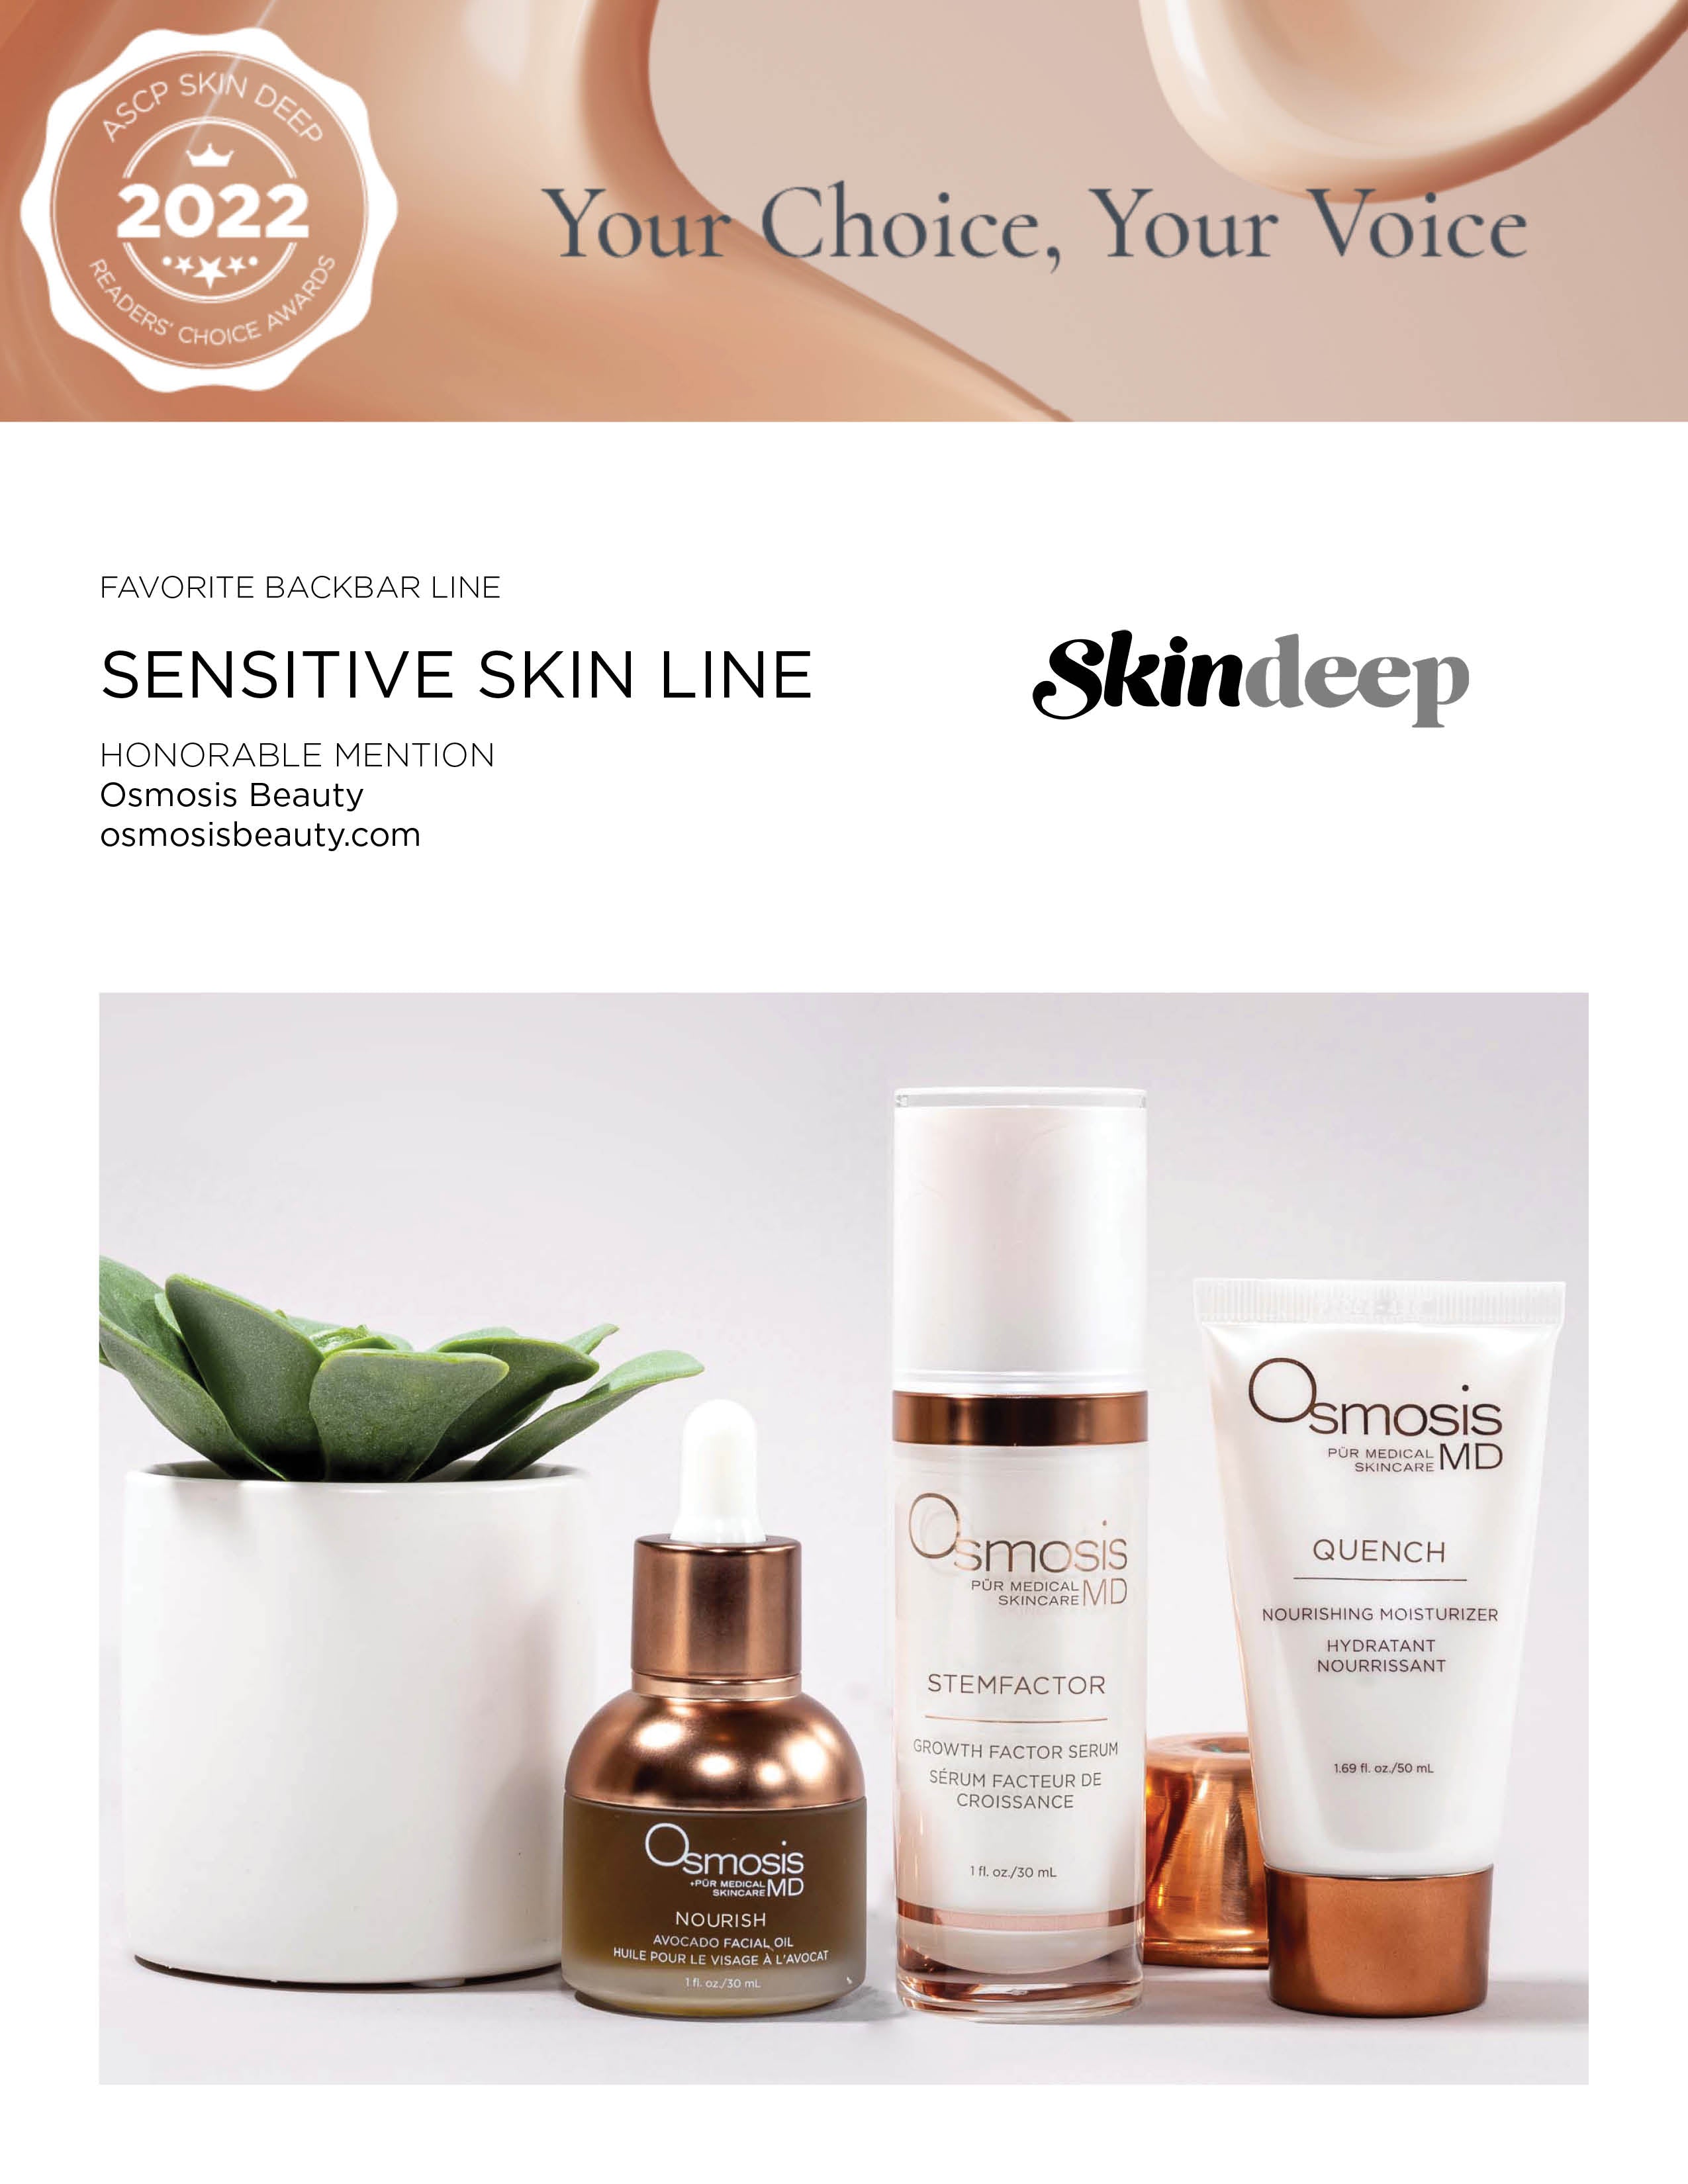 Skindeep included Osmosis Beauty as an honorable mention in their Readers Choice Awards for the category Favorite Backbar Line specifically under Sensitive Skincare Line which appeared in the Summer 2022 print issue.